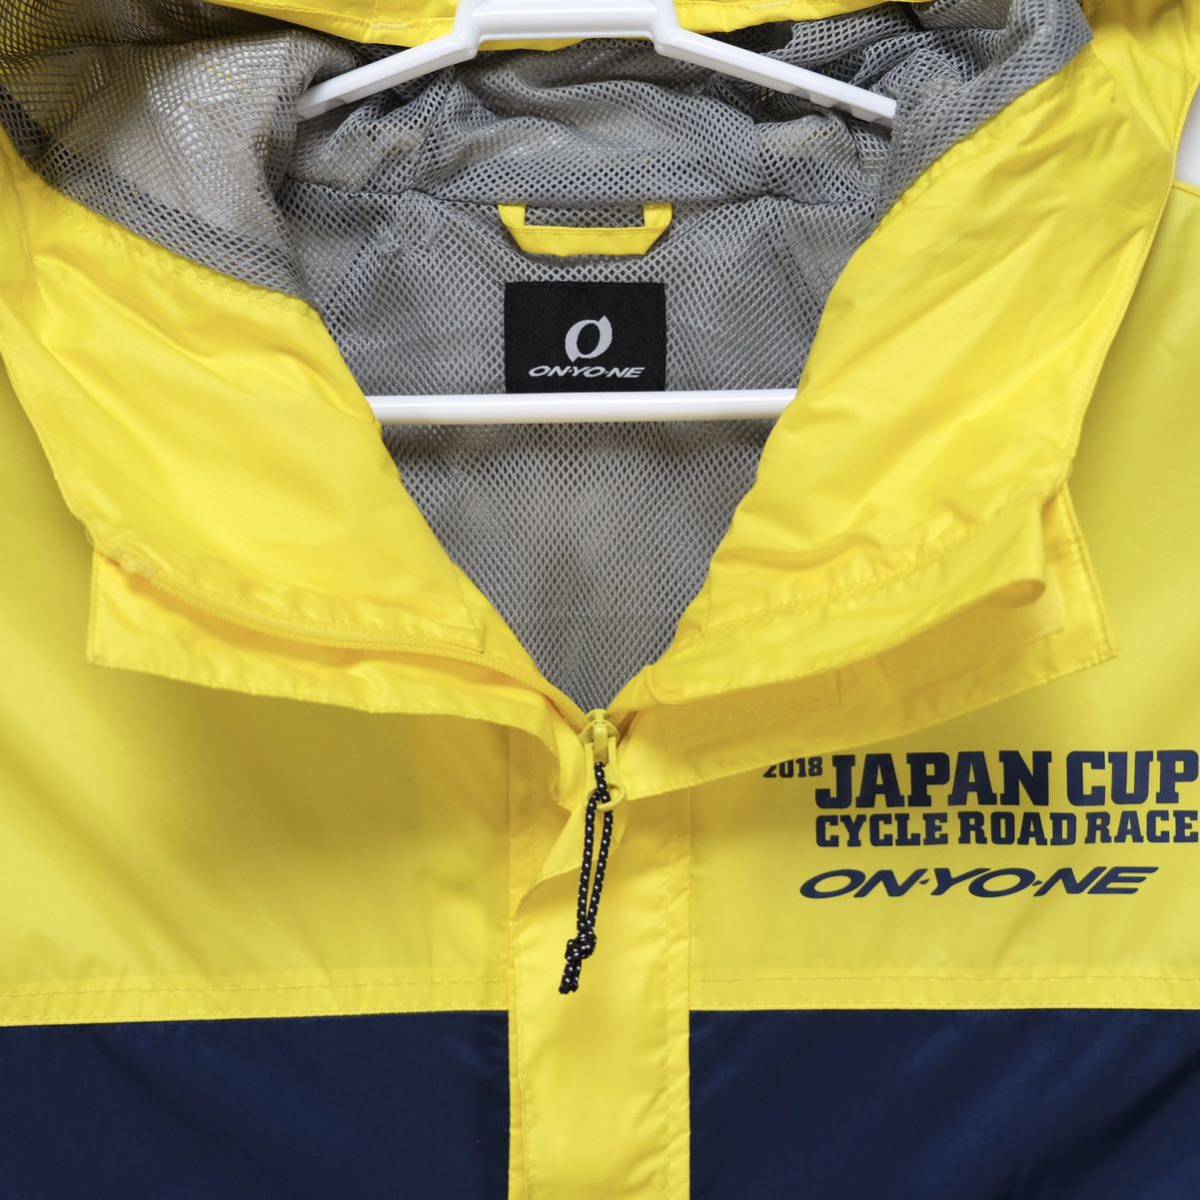 [ free shipping ]2018 Japan cup cycle load race /JAPAN CUP CYCLE ROAD RACE/ rain jacket /ONYONE( Onyone )/ free size 